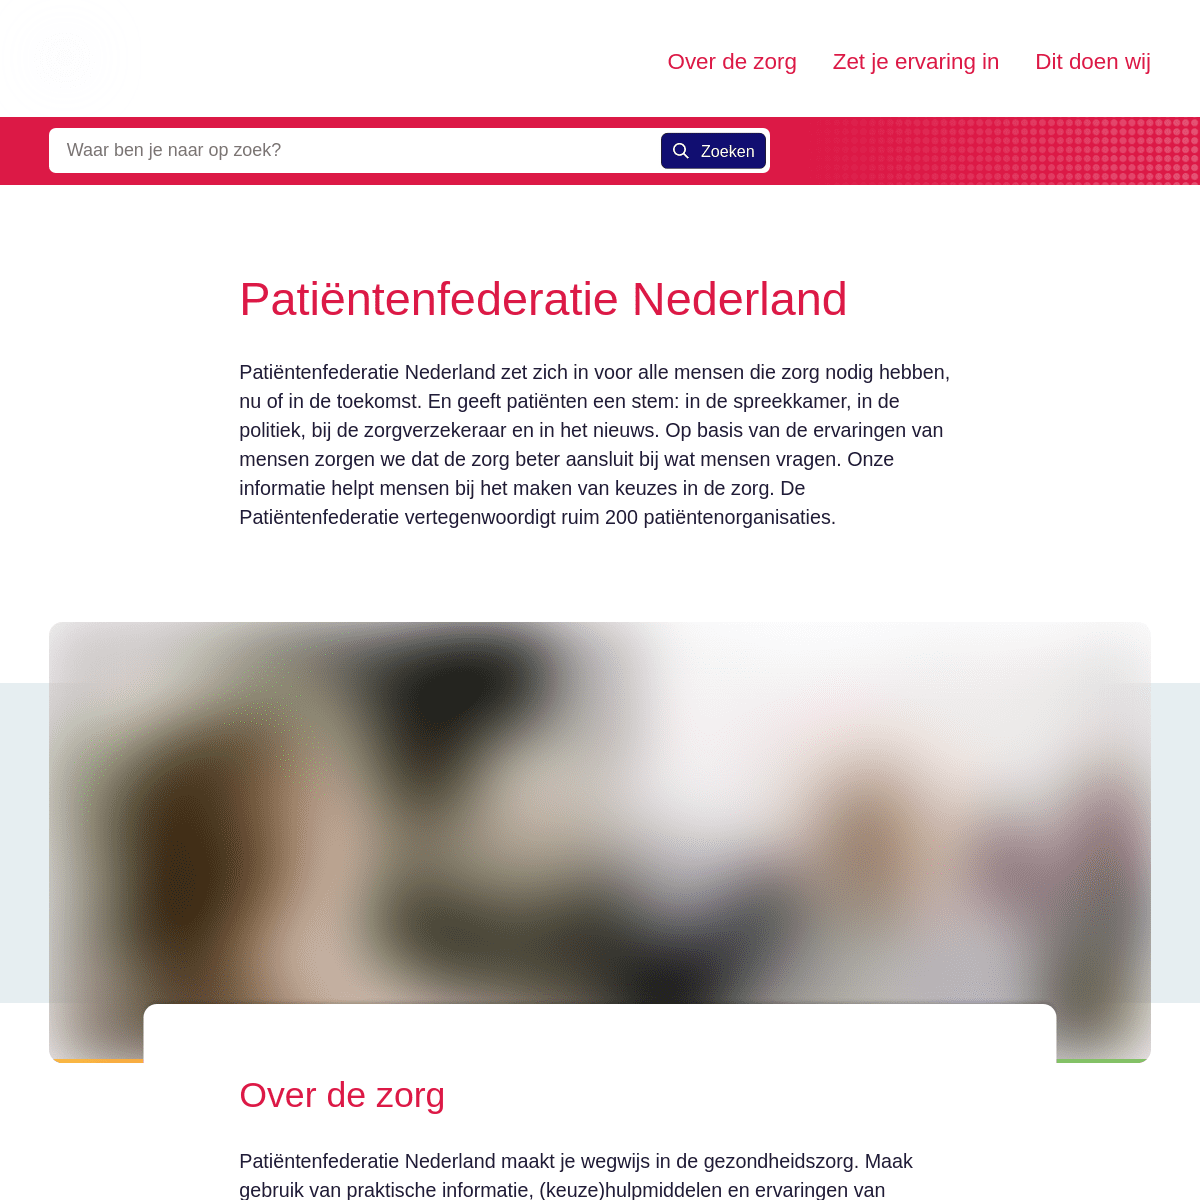 A complete backup of patientenfederatie.nl